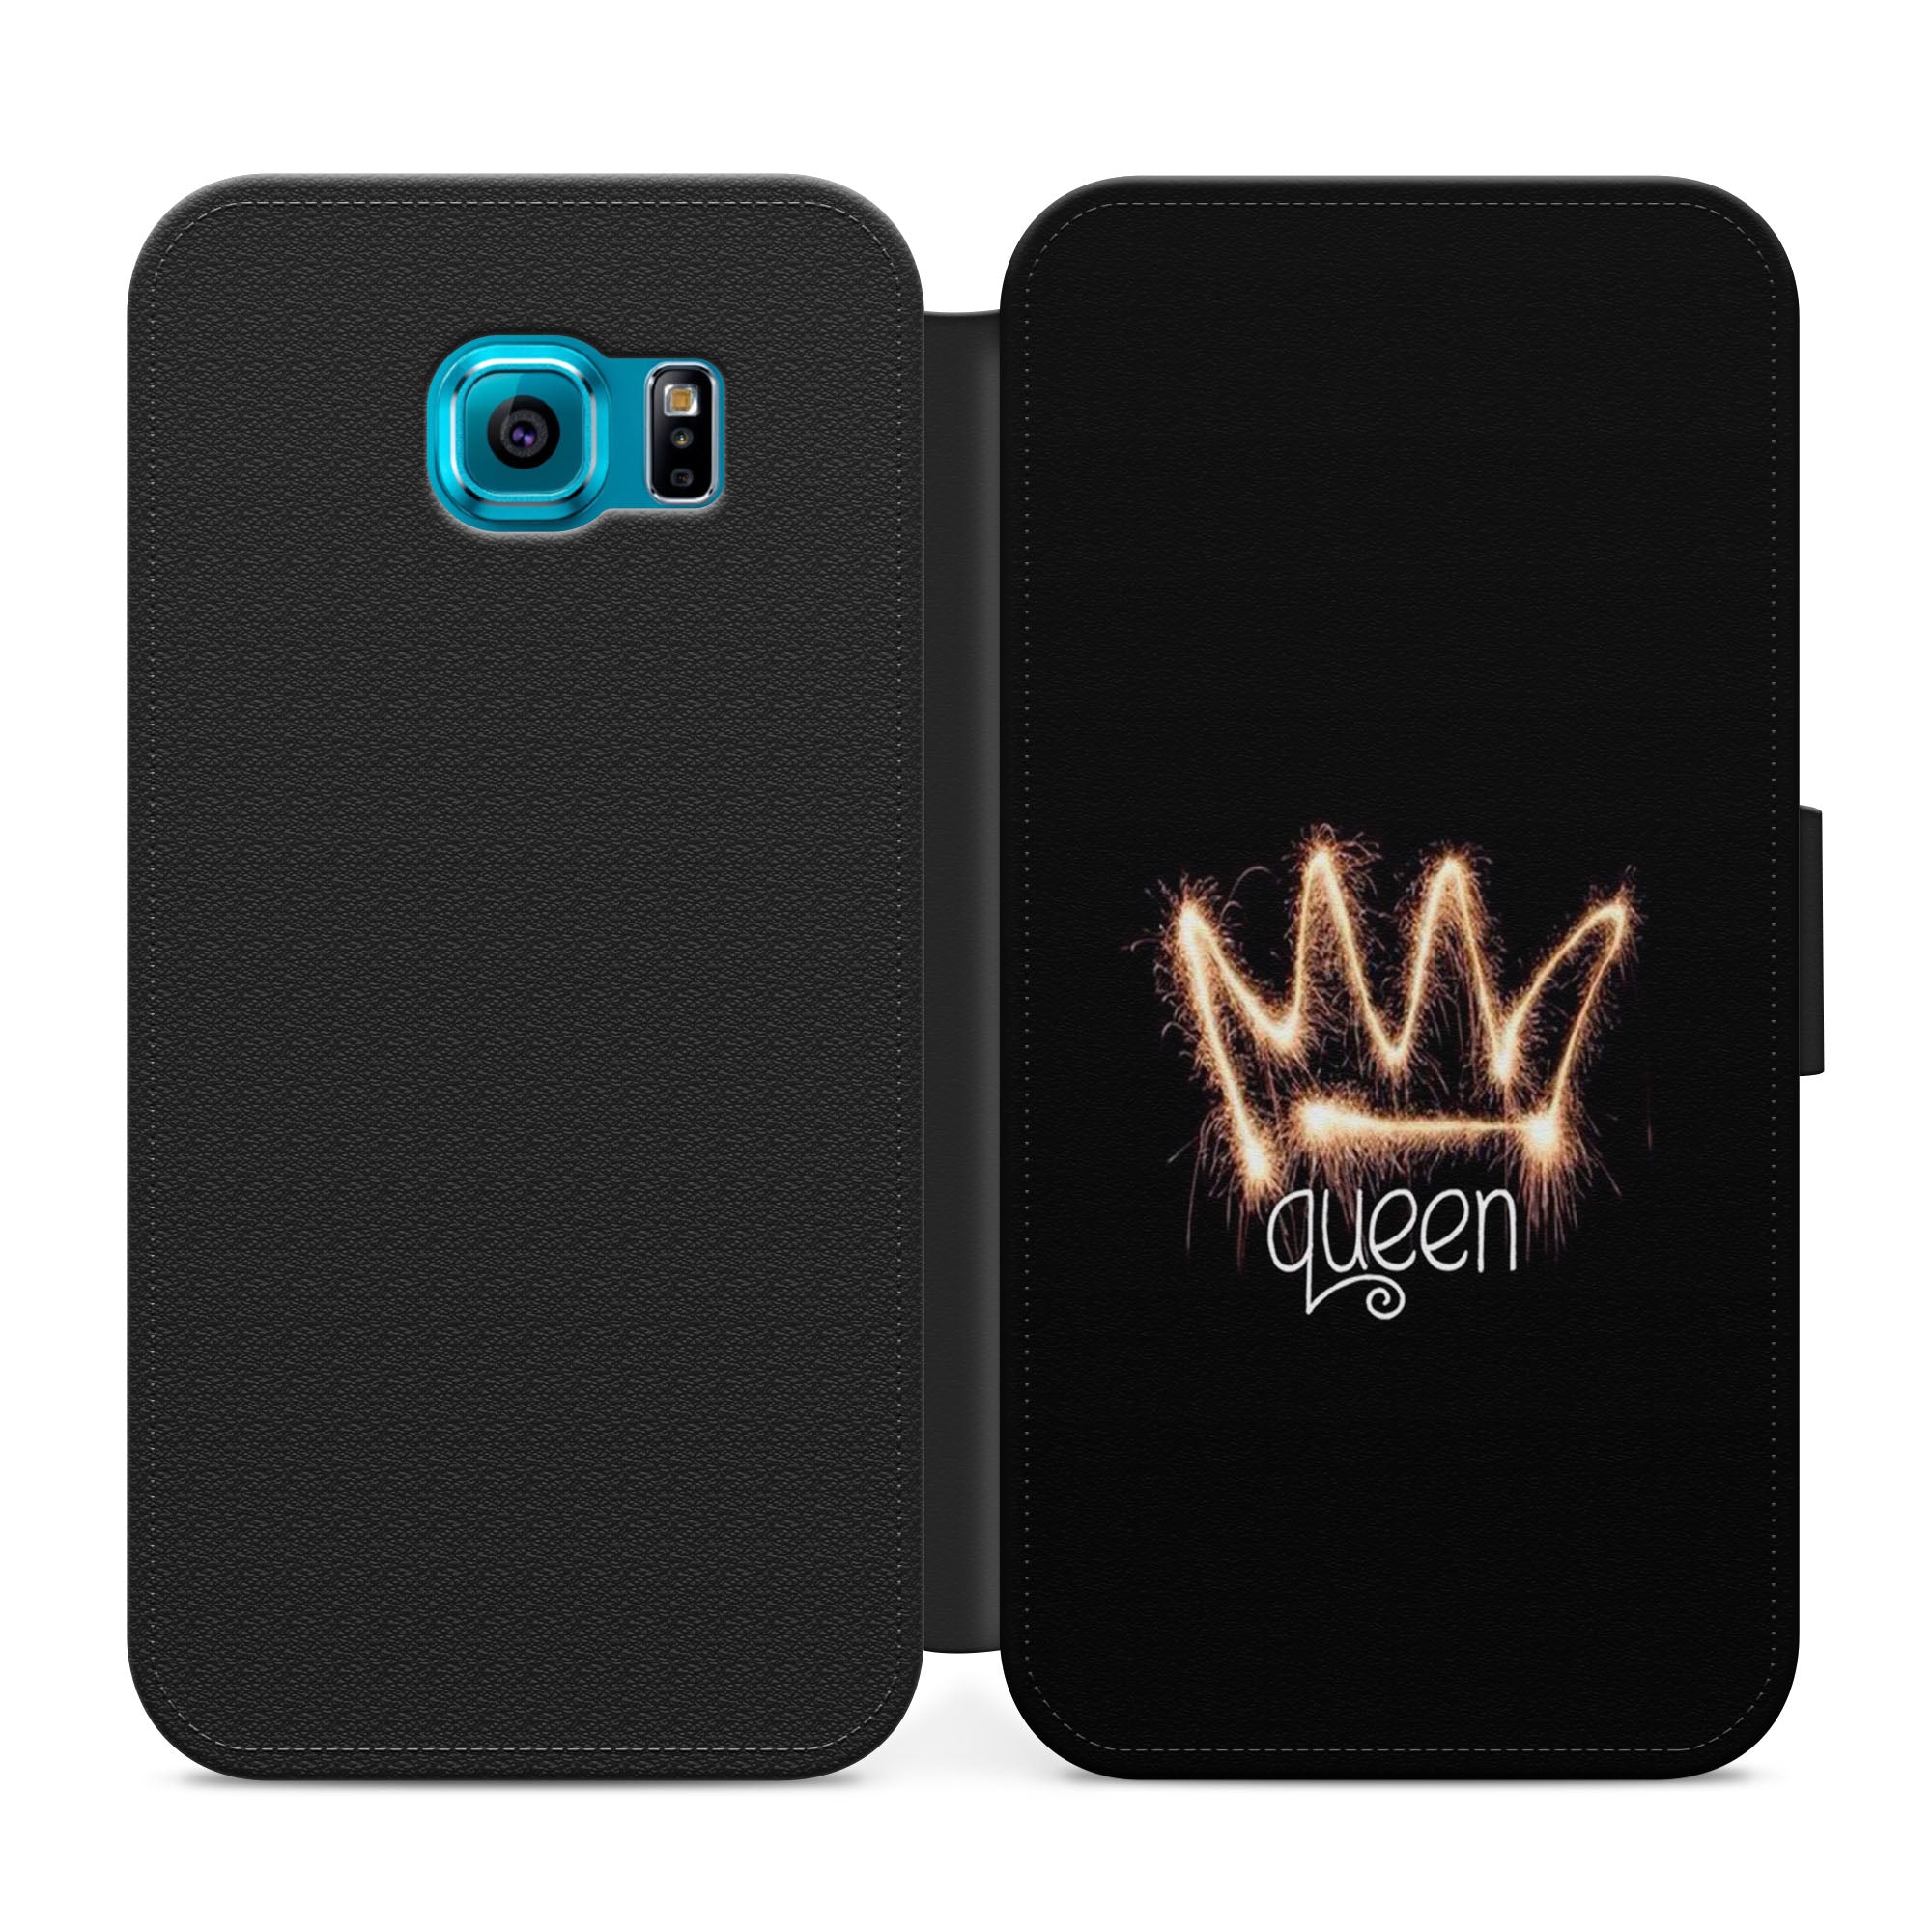 I'm A Queen Faux Leather Flip Case Wallet for iPhone / Samsung